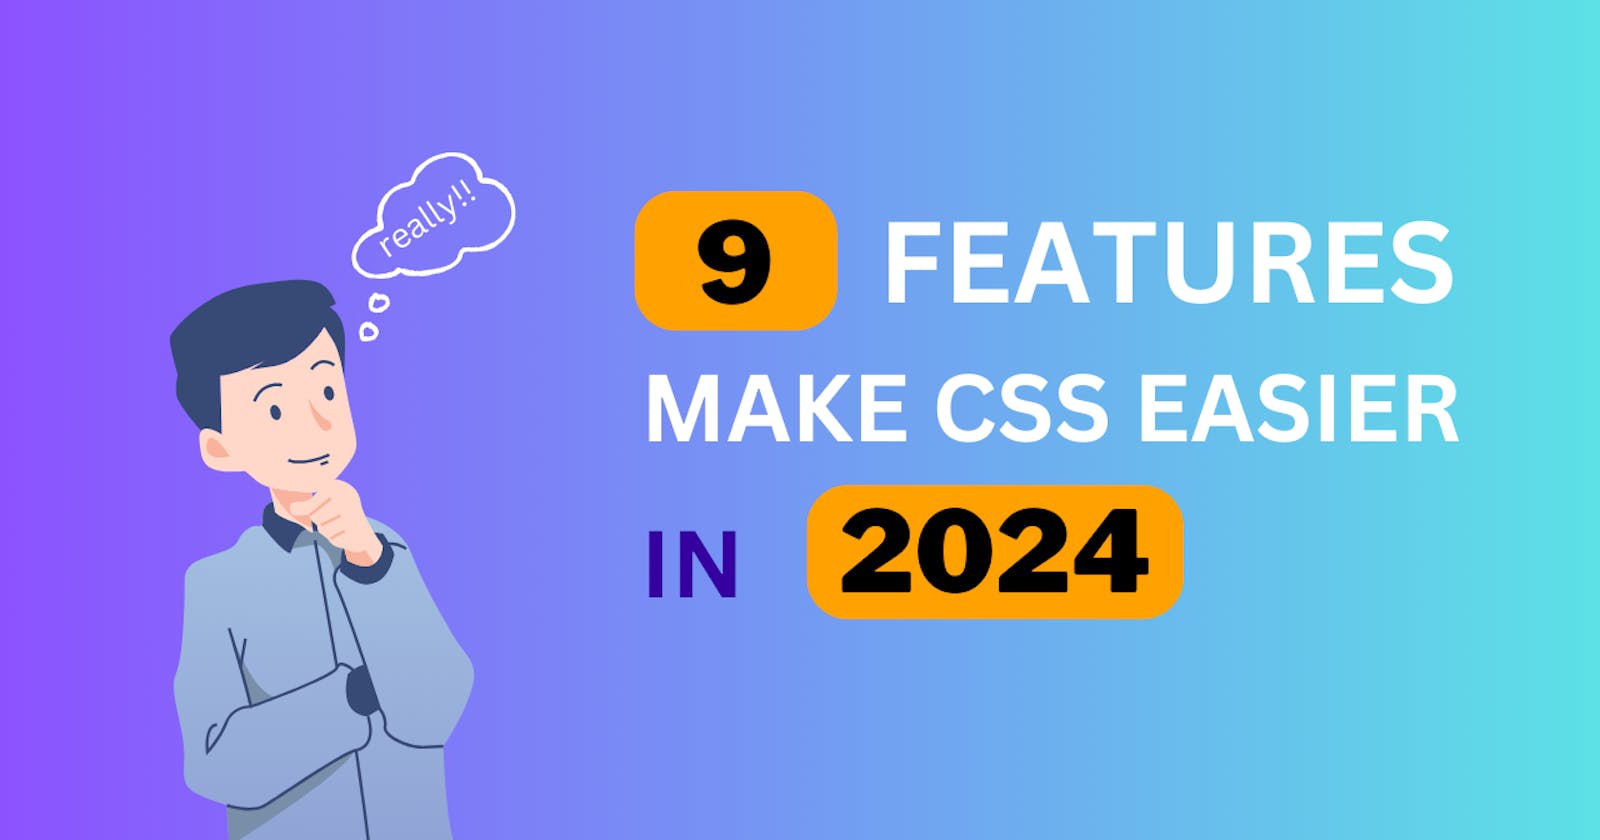 9 Features Make CSS Easier in 2024